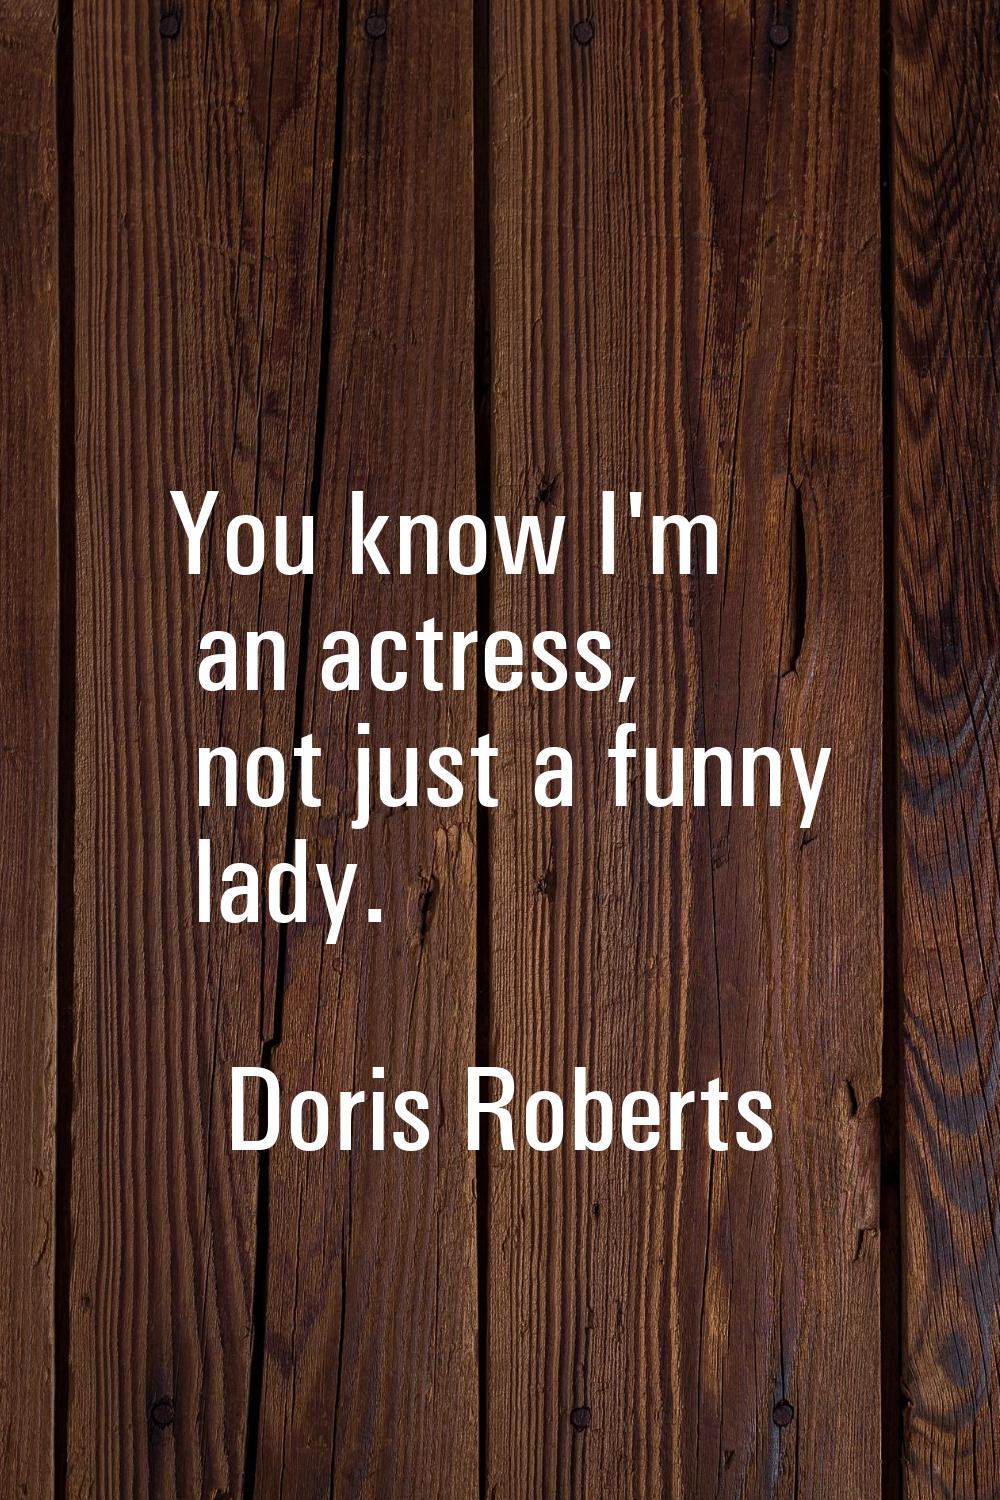 You know I'm an actress, not just a funny lady.